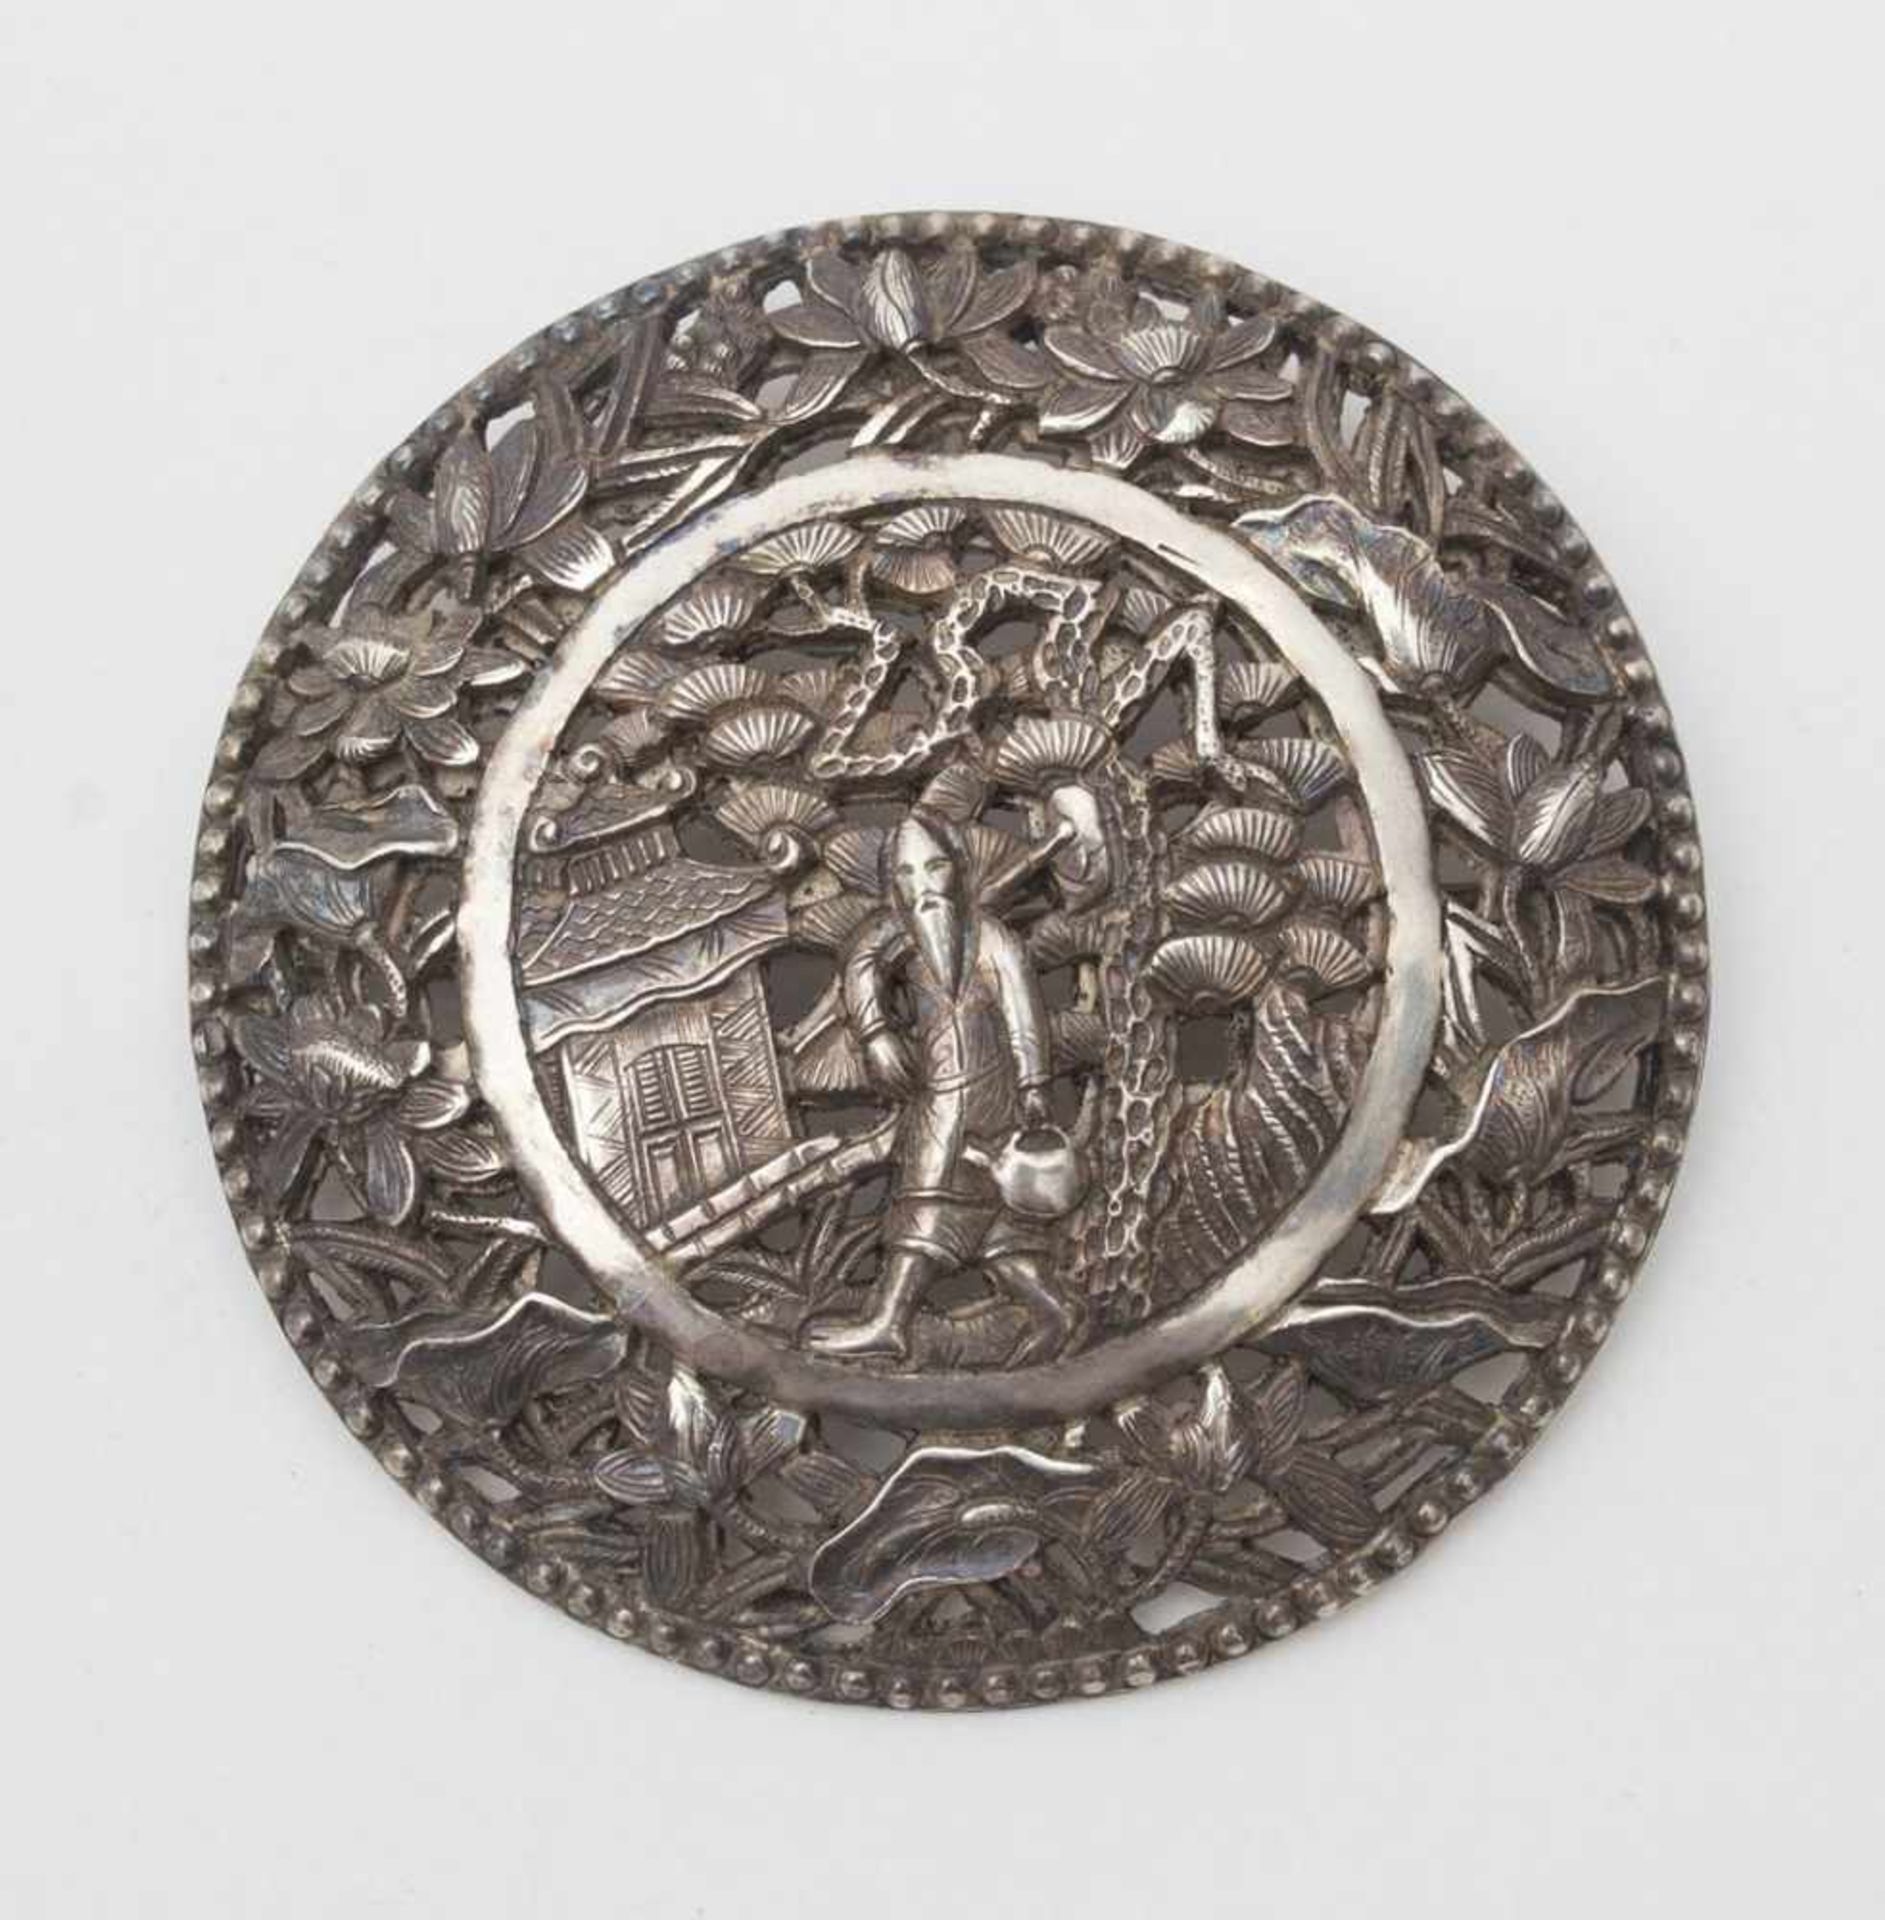 Brooch-pendant - China, early 20th century Silver, circular-shaped, openwork depicting a landscape